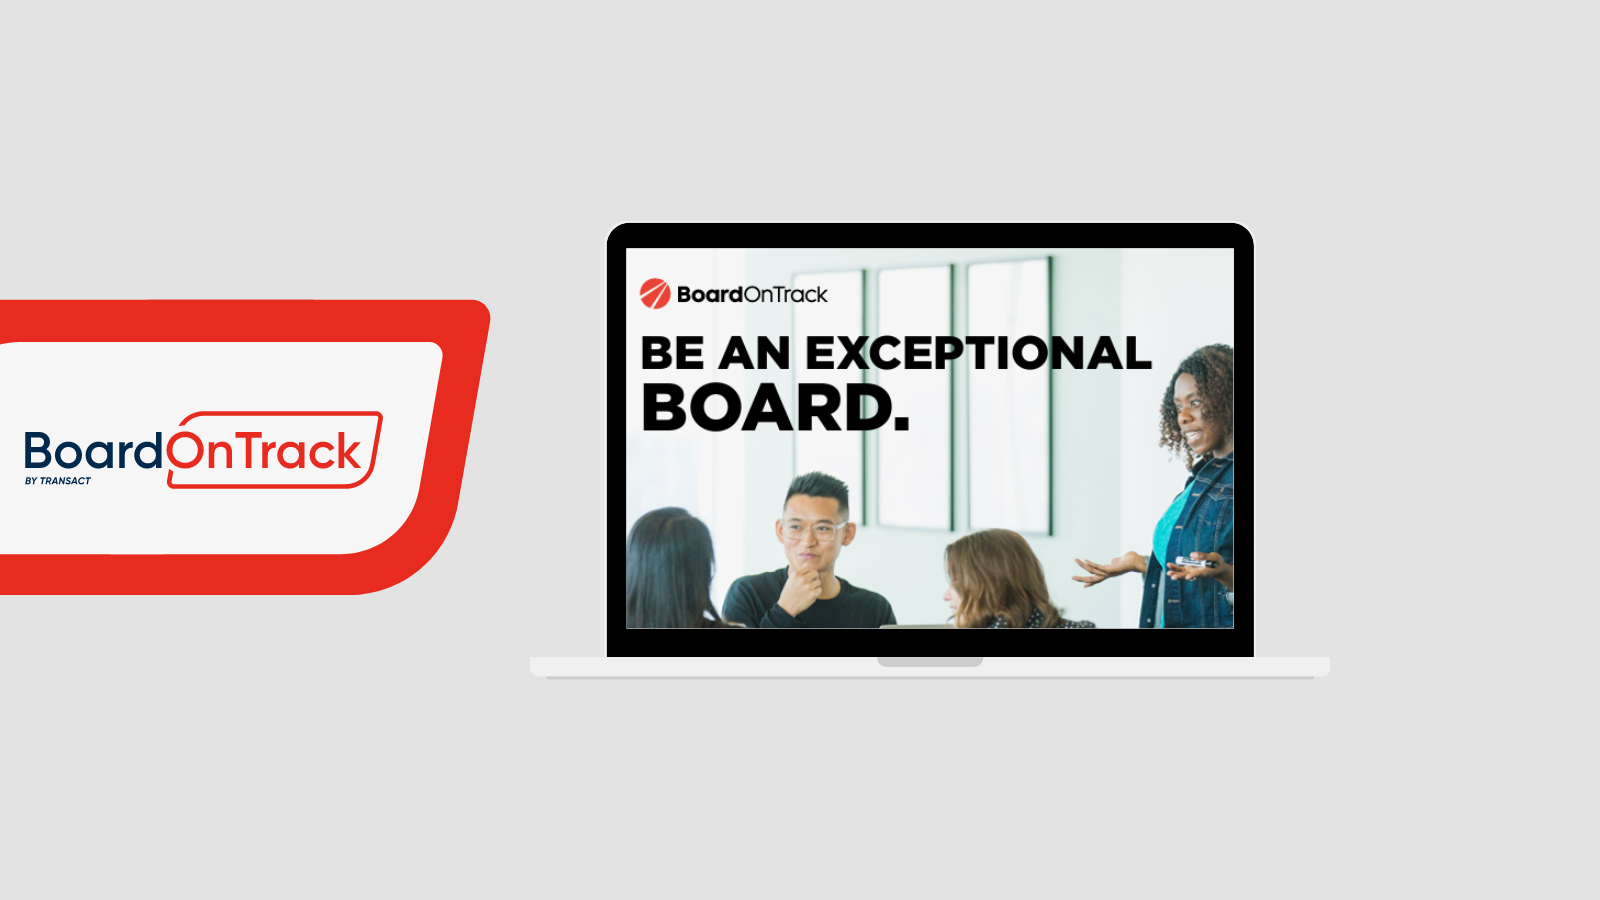 Be an Exceptional Board